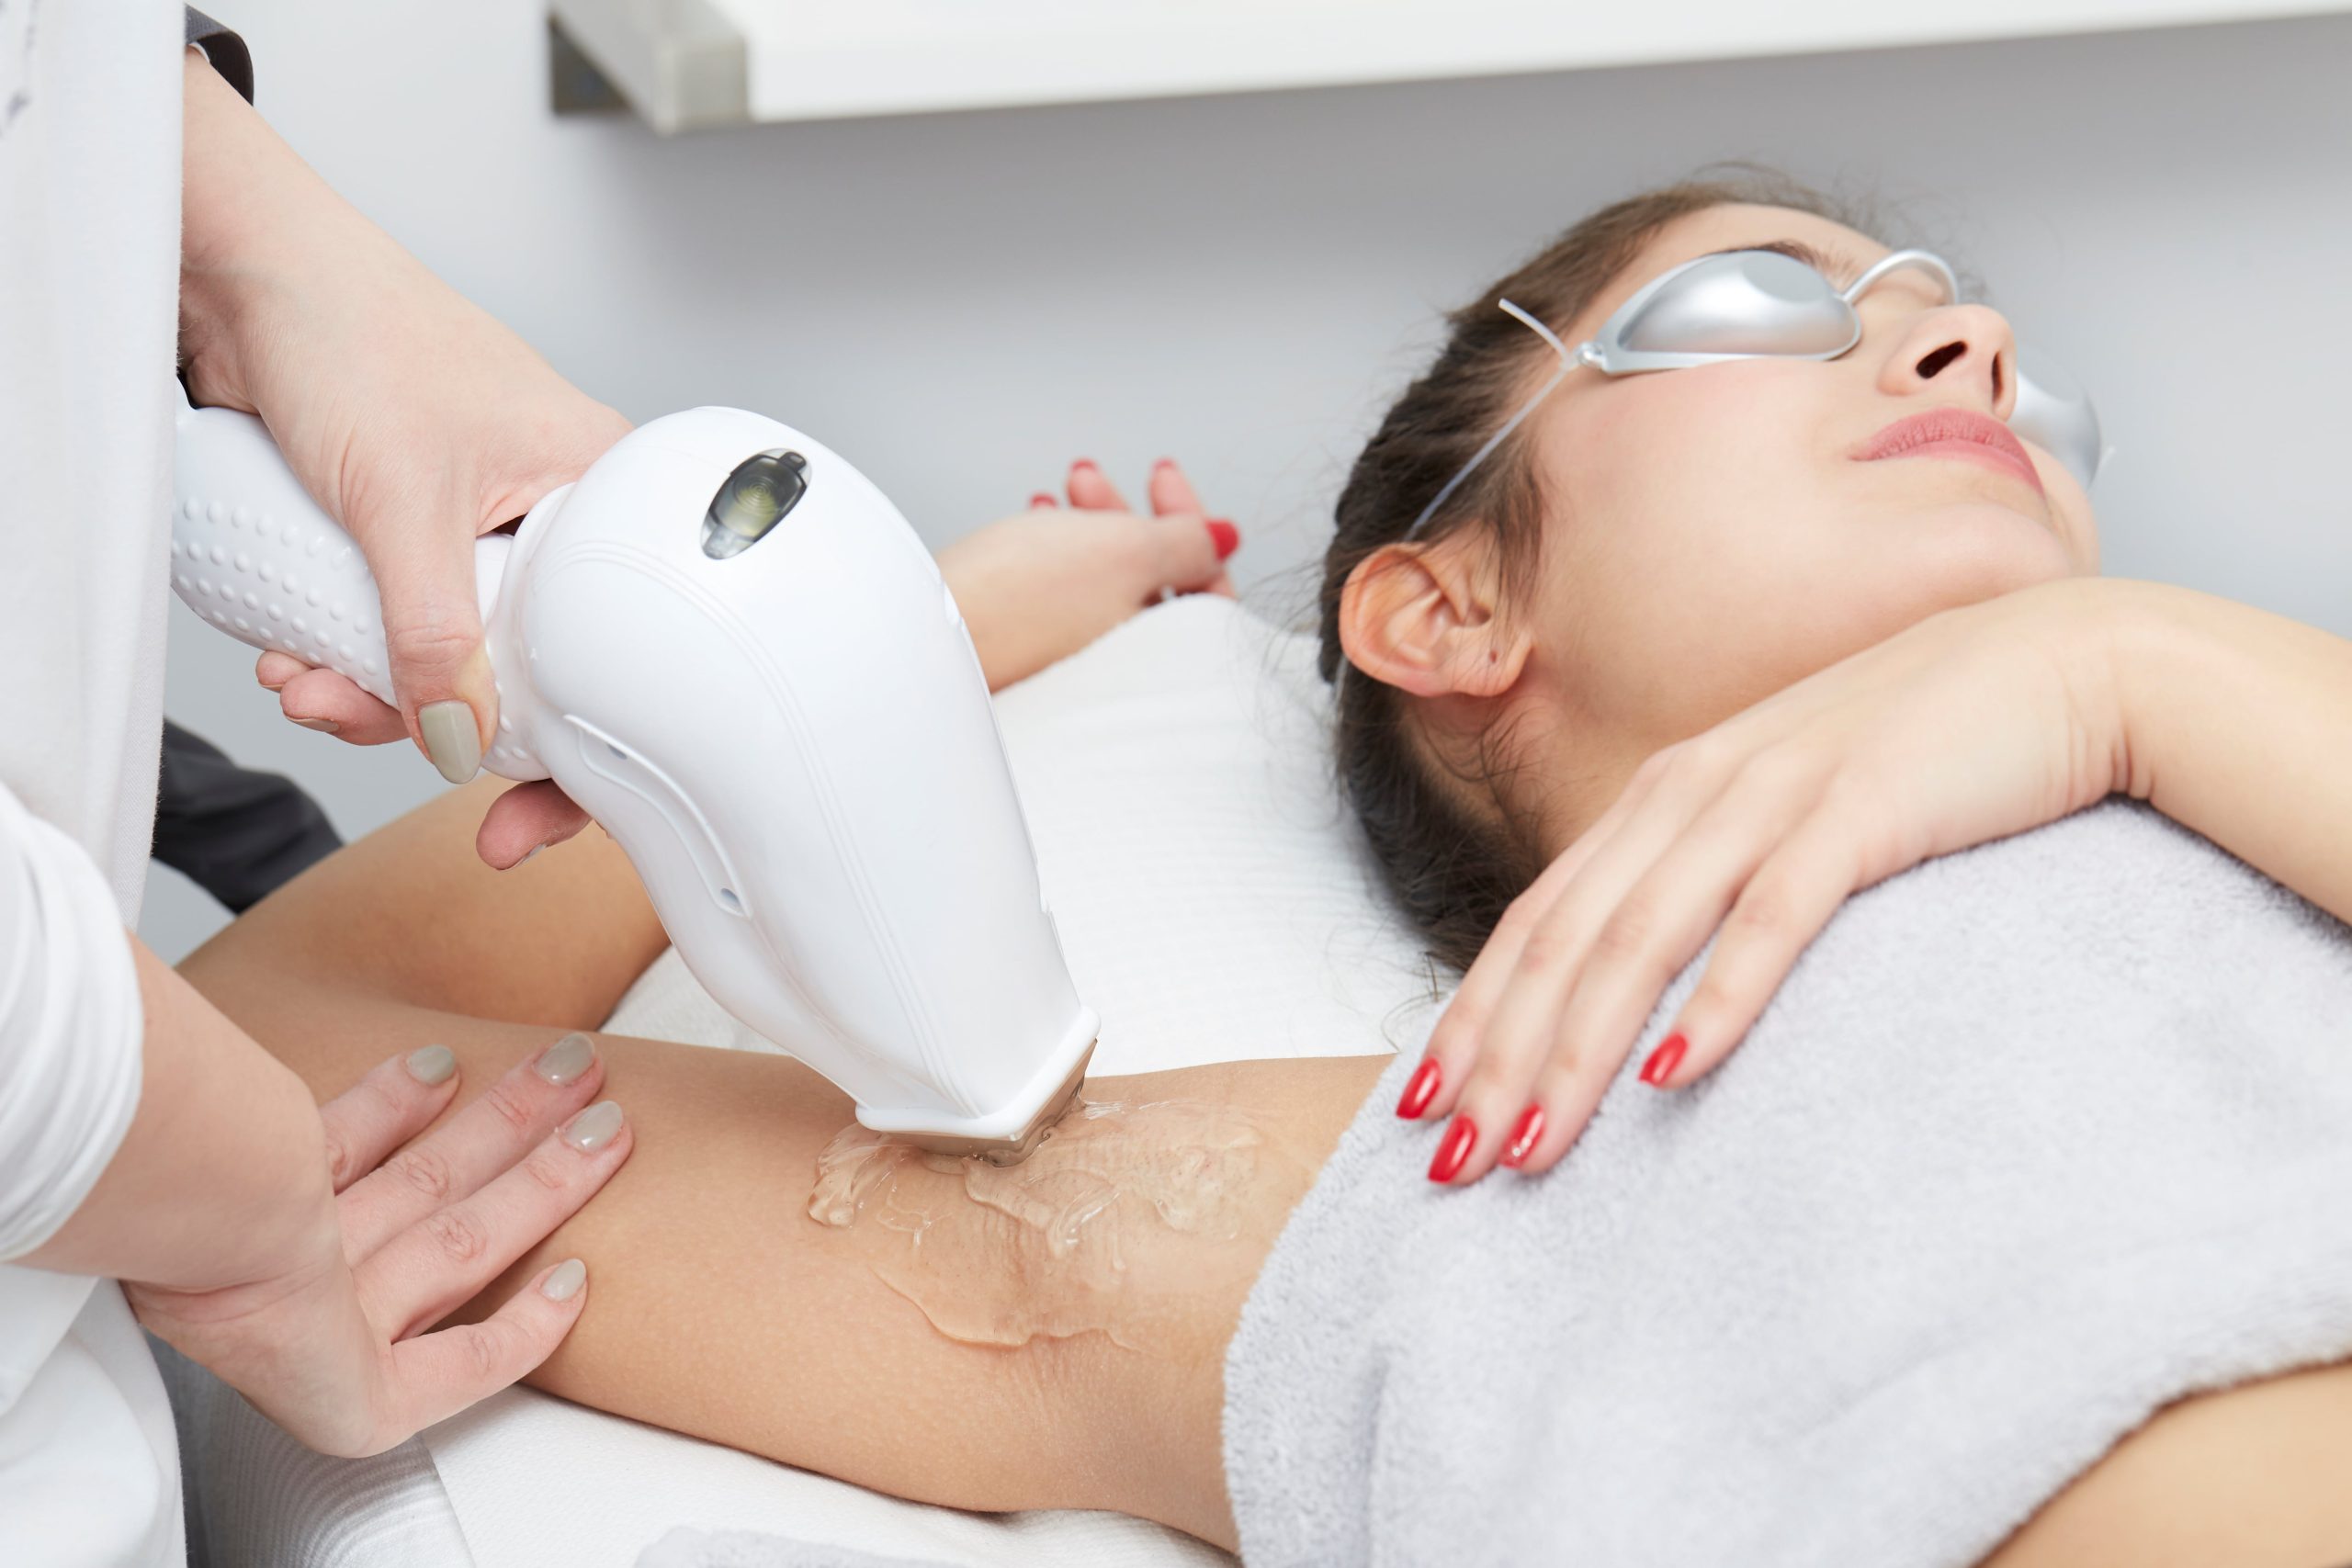 What is The Hollywood Laser Hair Removal?